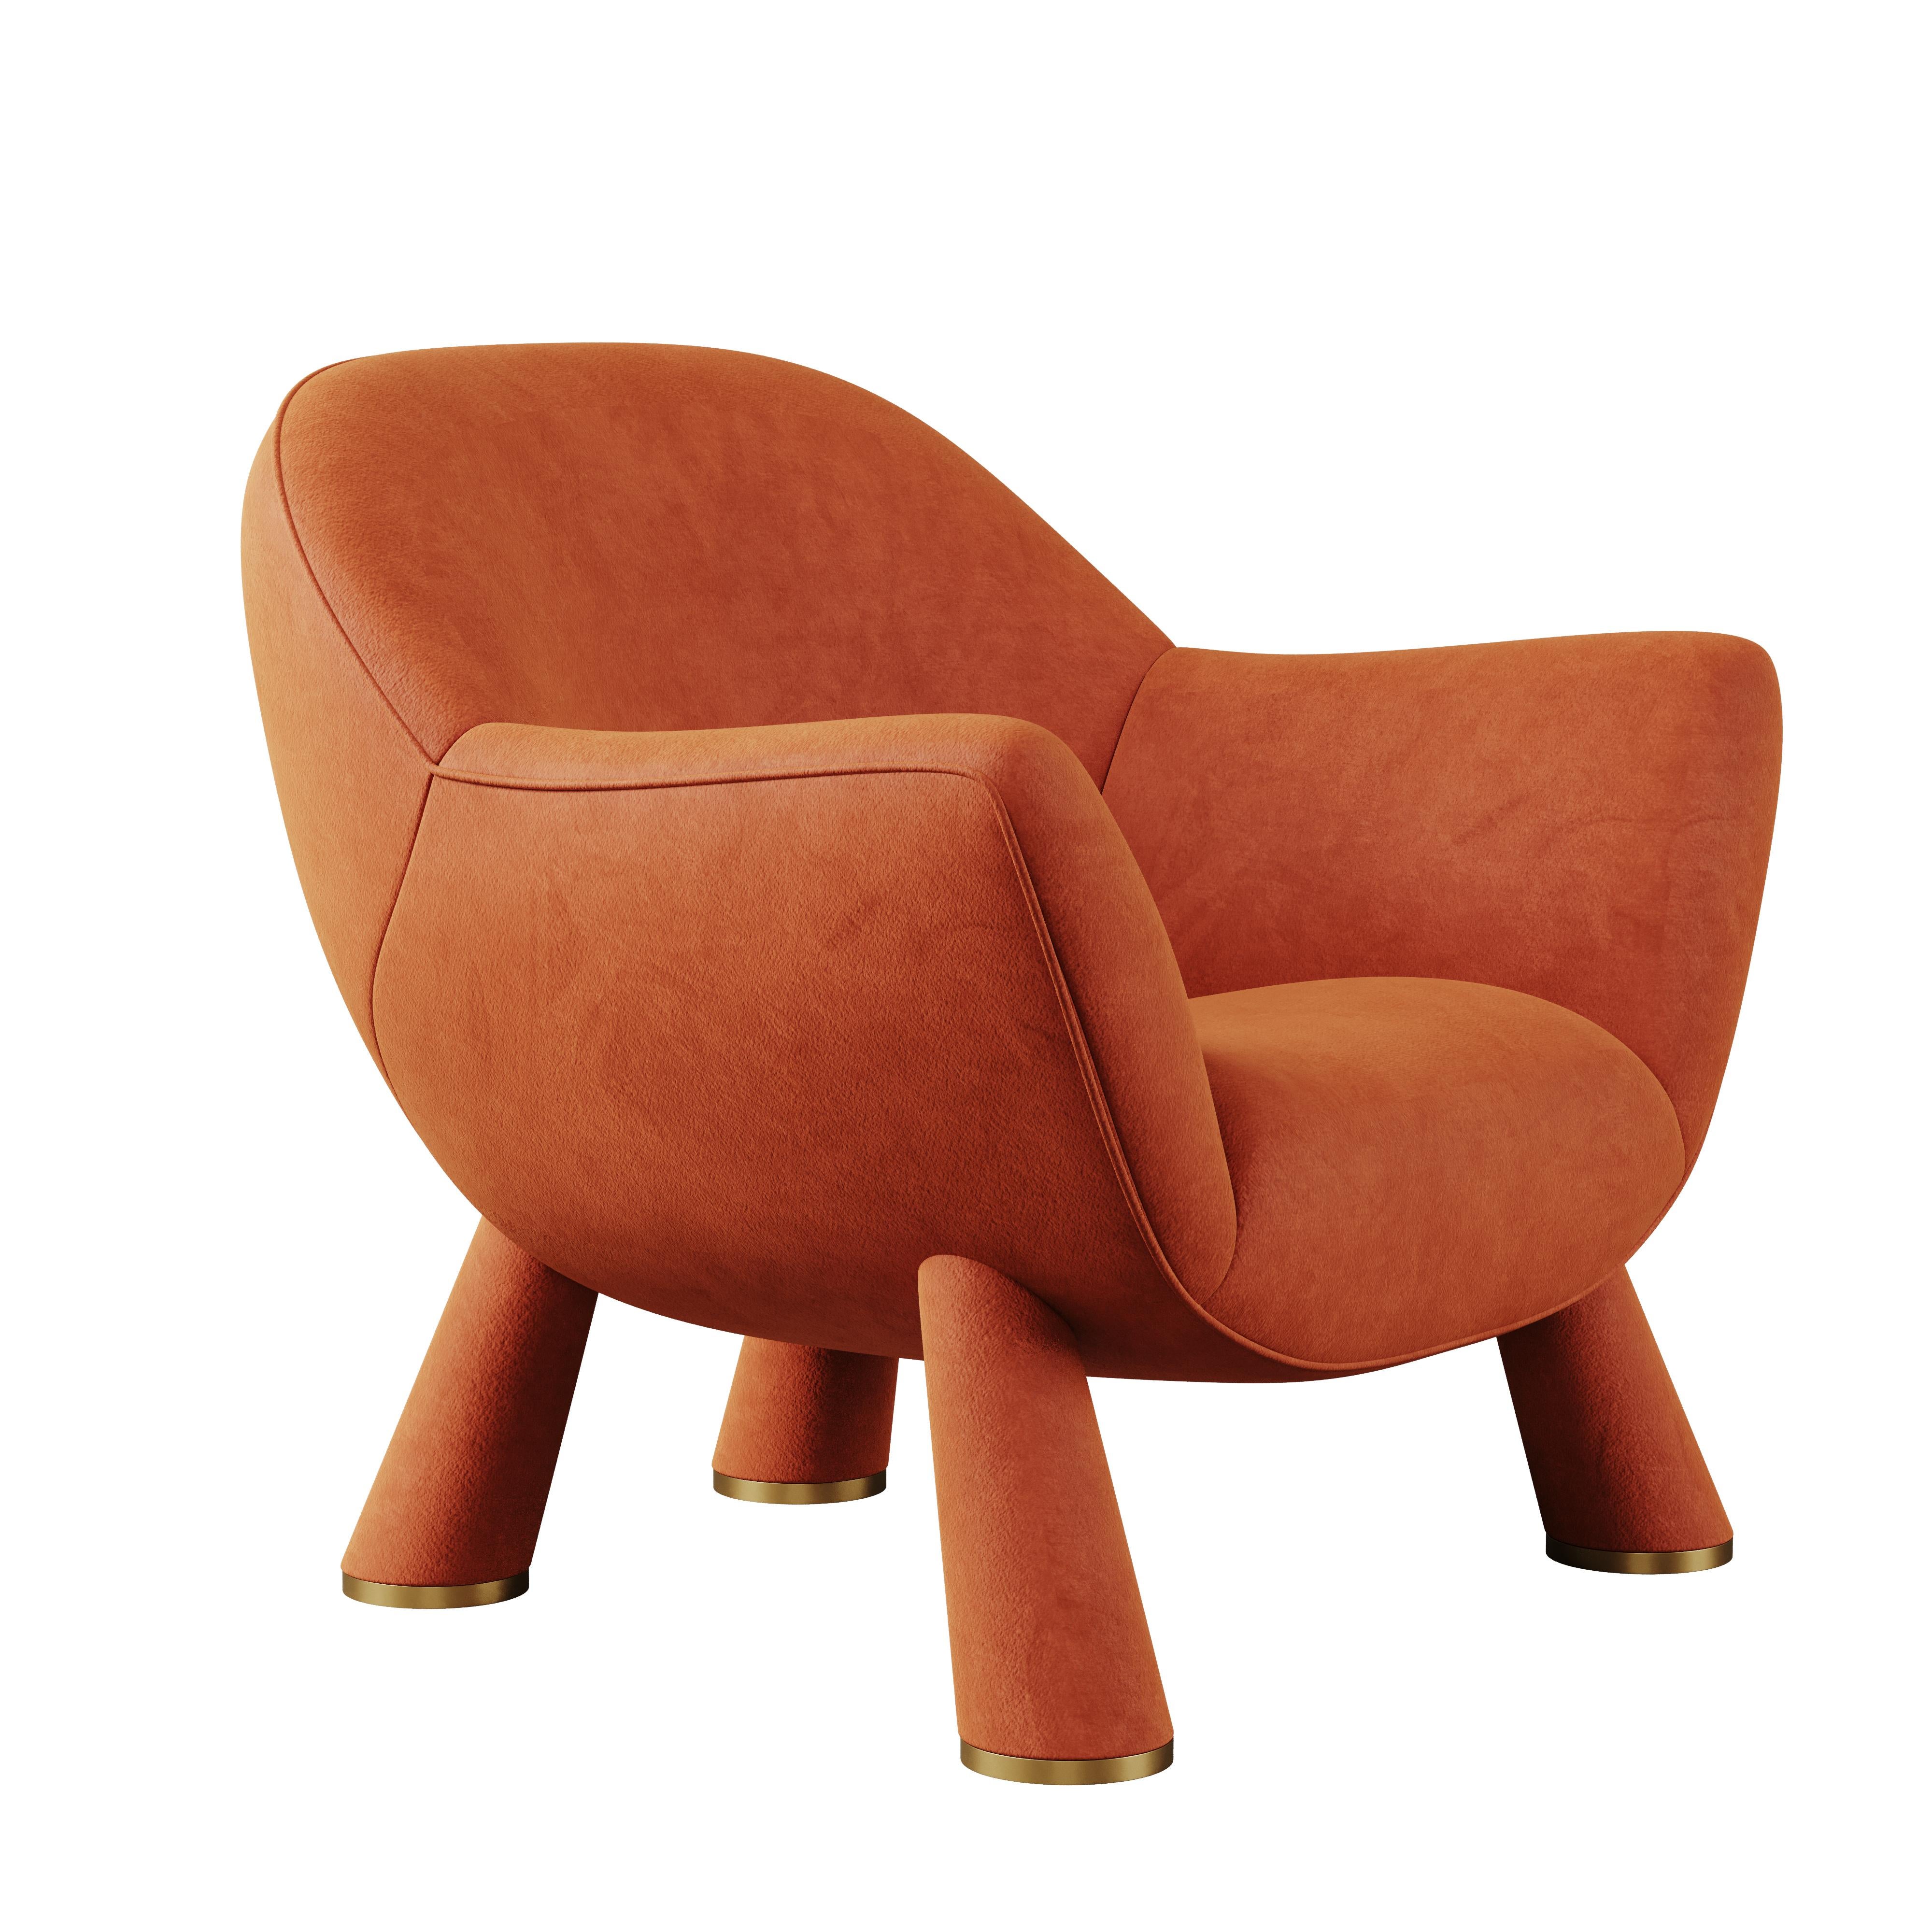 Portuguese Mid-Century Modern Style Lucy Armchair Walnut Wood Polished Brass Cotton Velvet For Sale